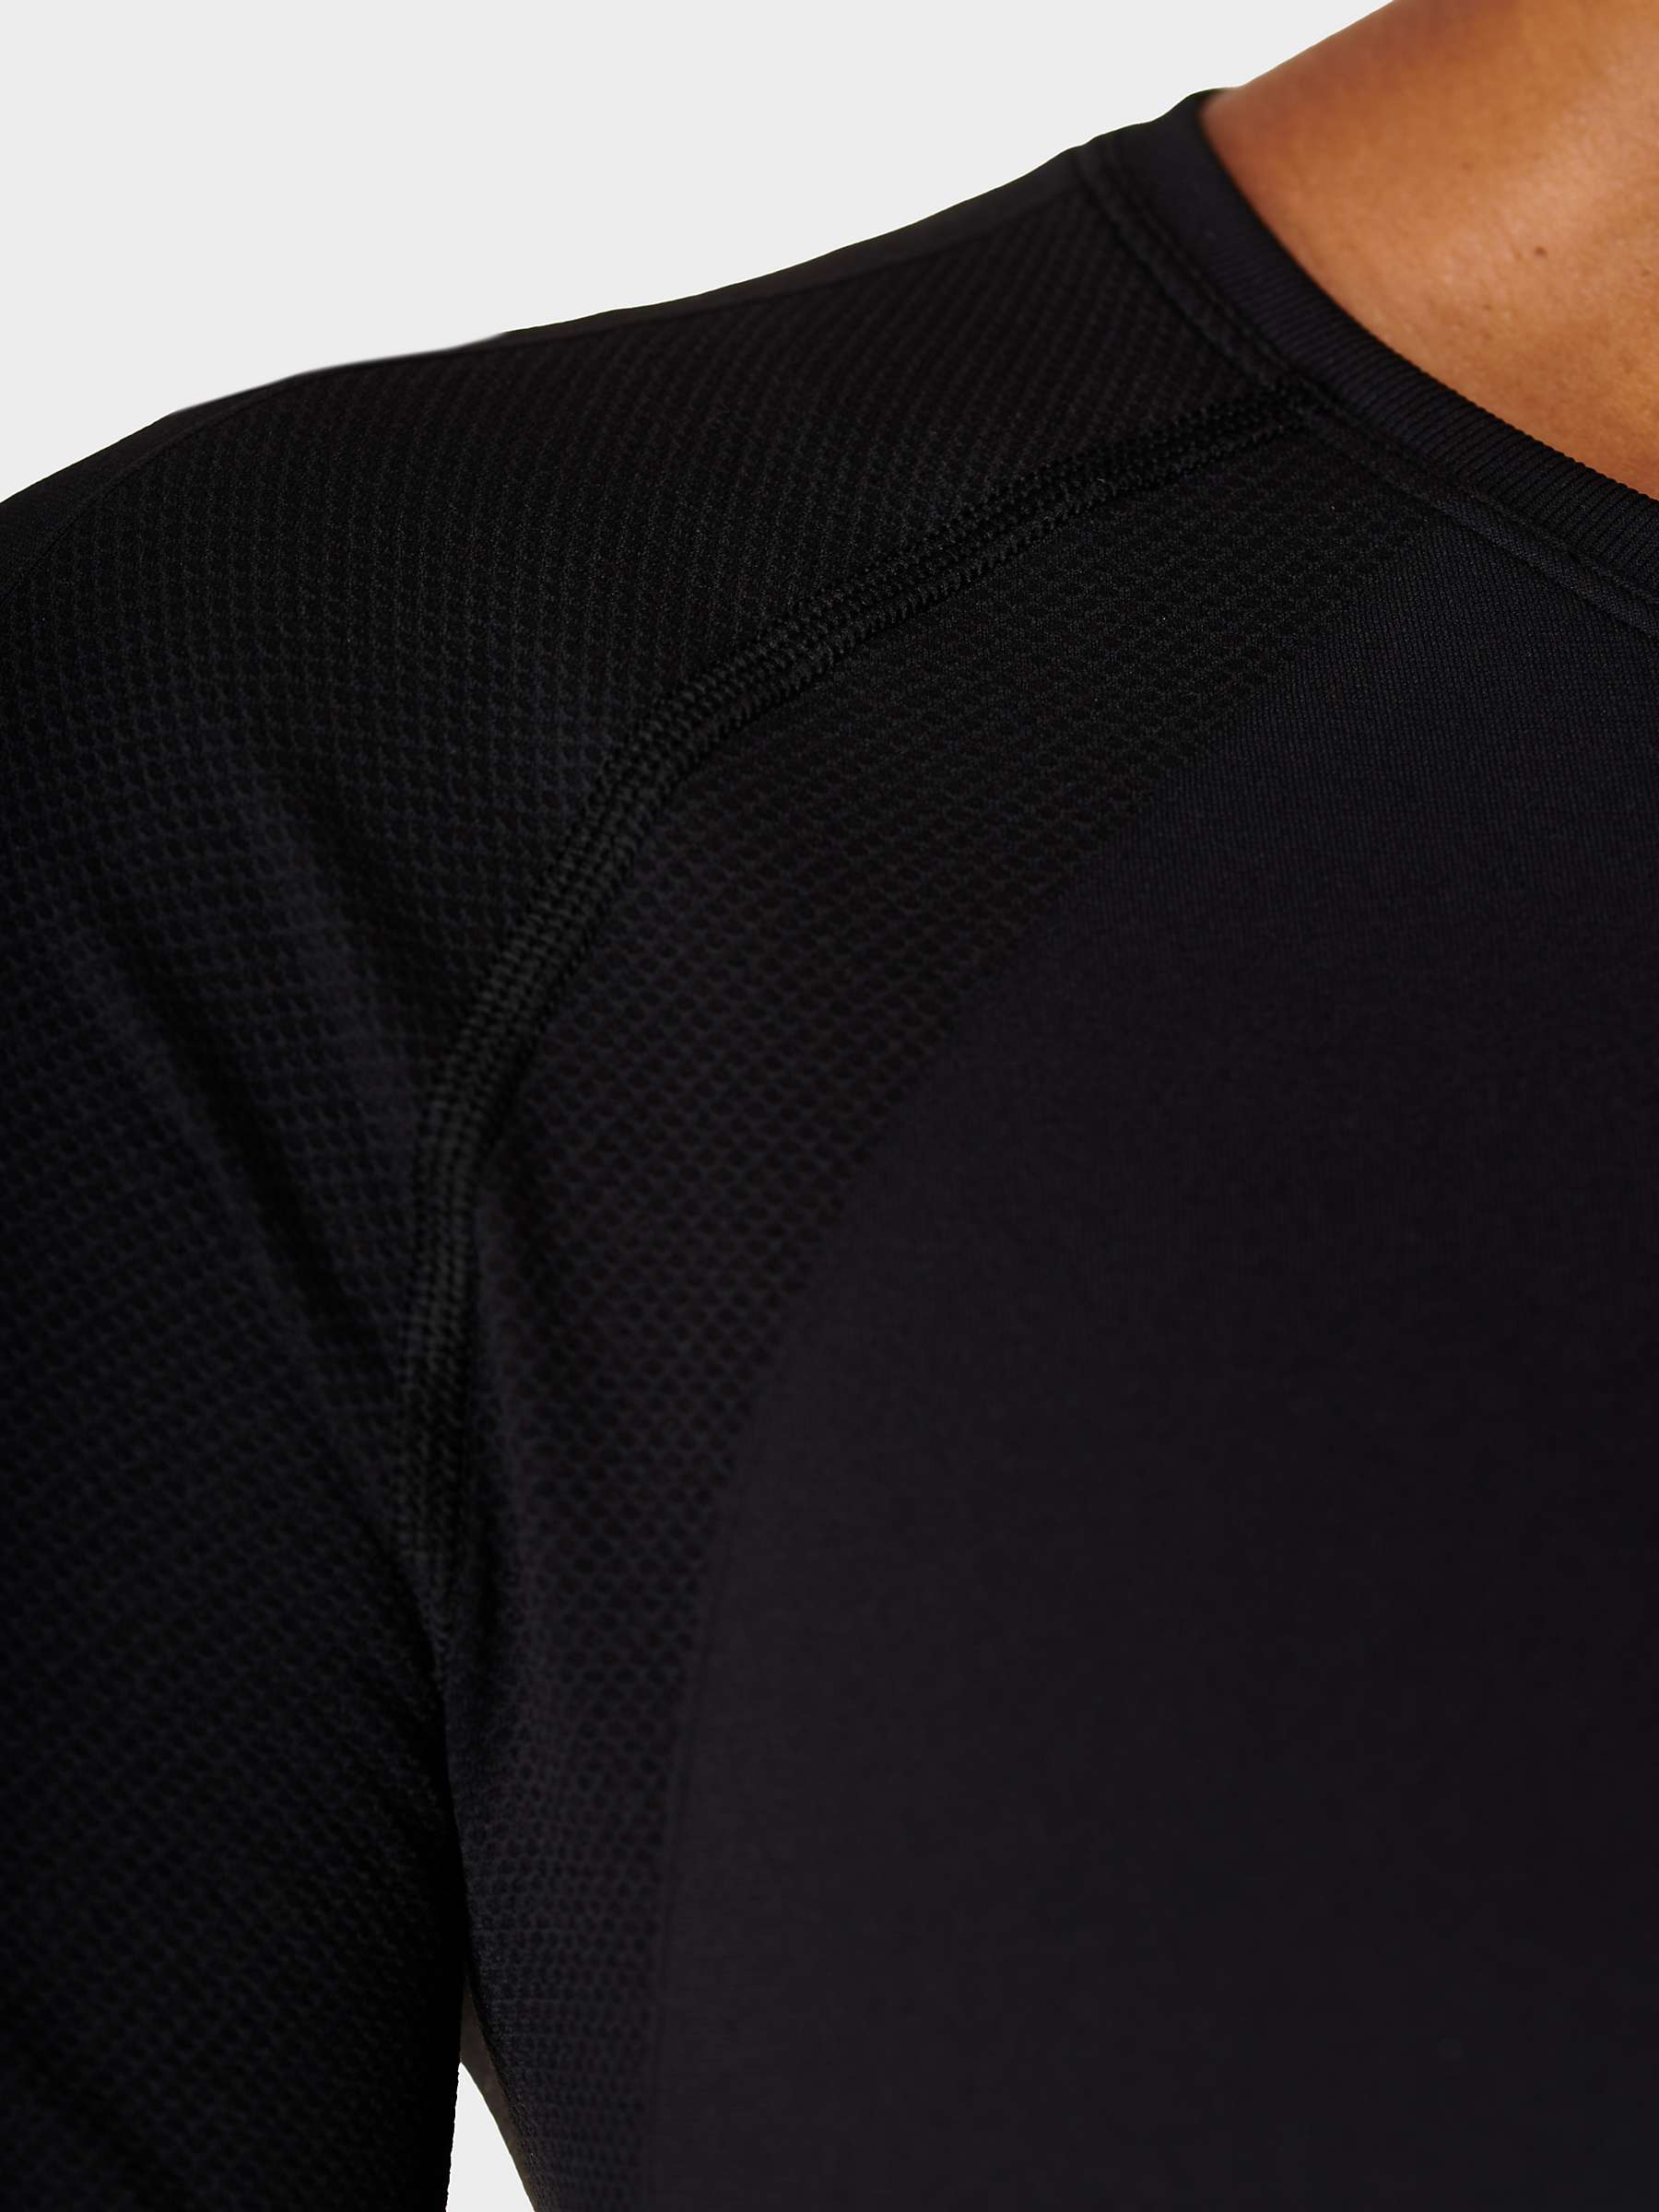 Buy Sweaty Betty Athlete Seamless Long Sleeve Gym Top Online at johnlewis.com